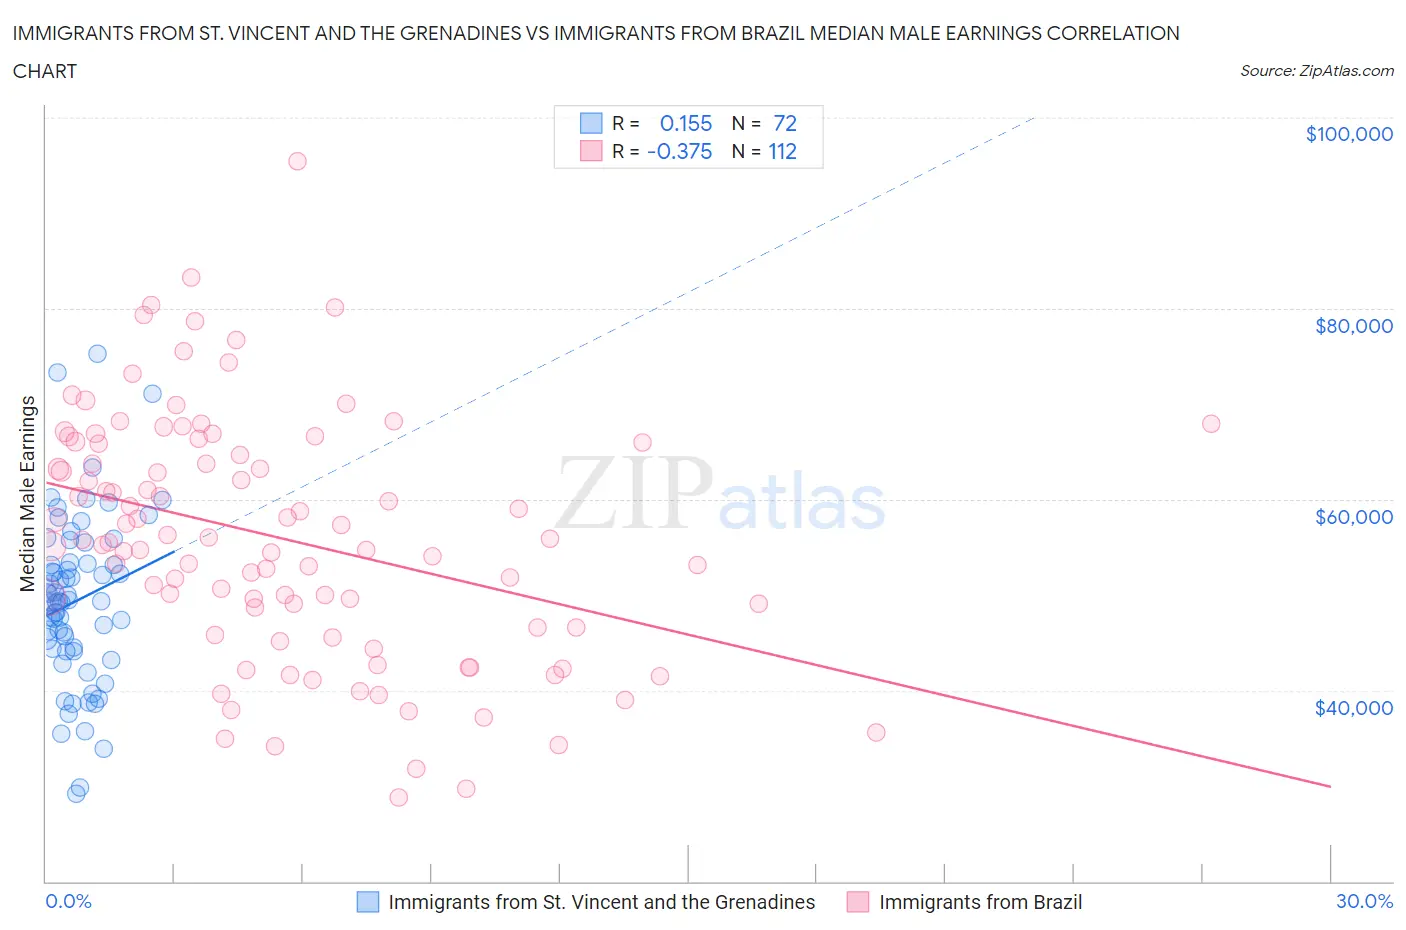 Immigrants from St. Vincent and the Grenadines vs Immigrants from Brazil Median Male Earnings